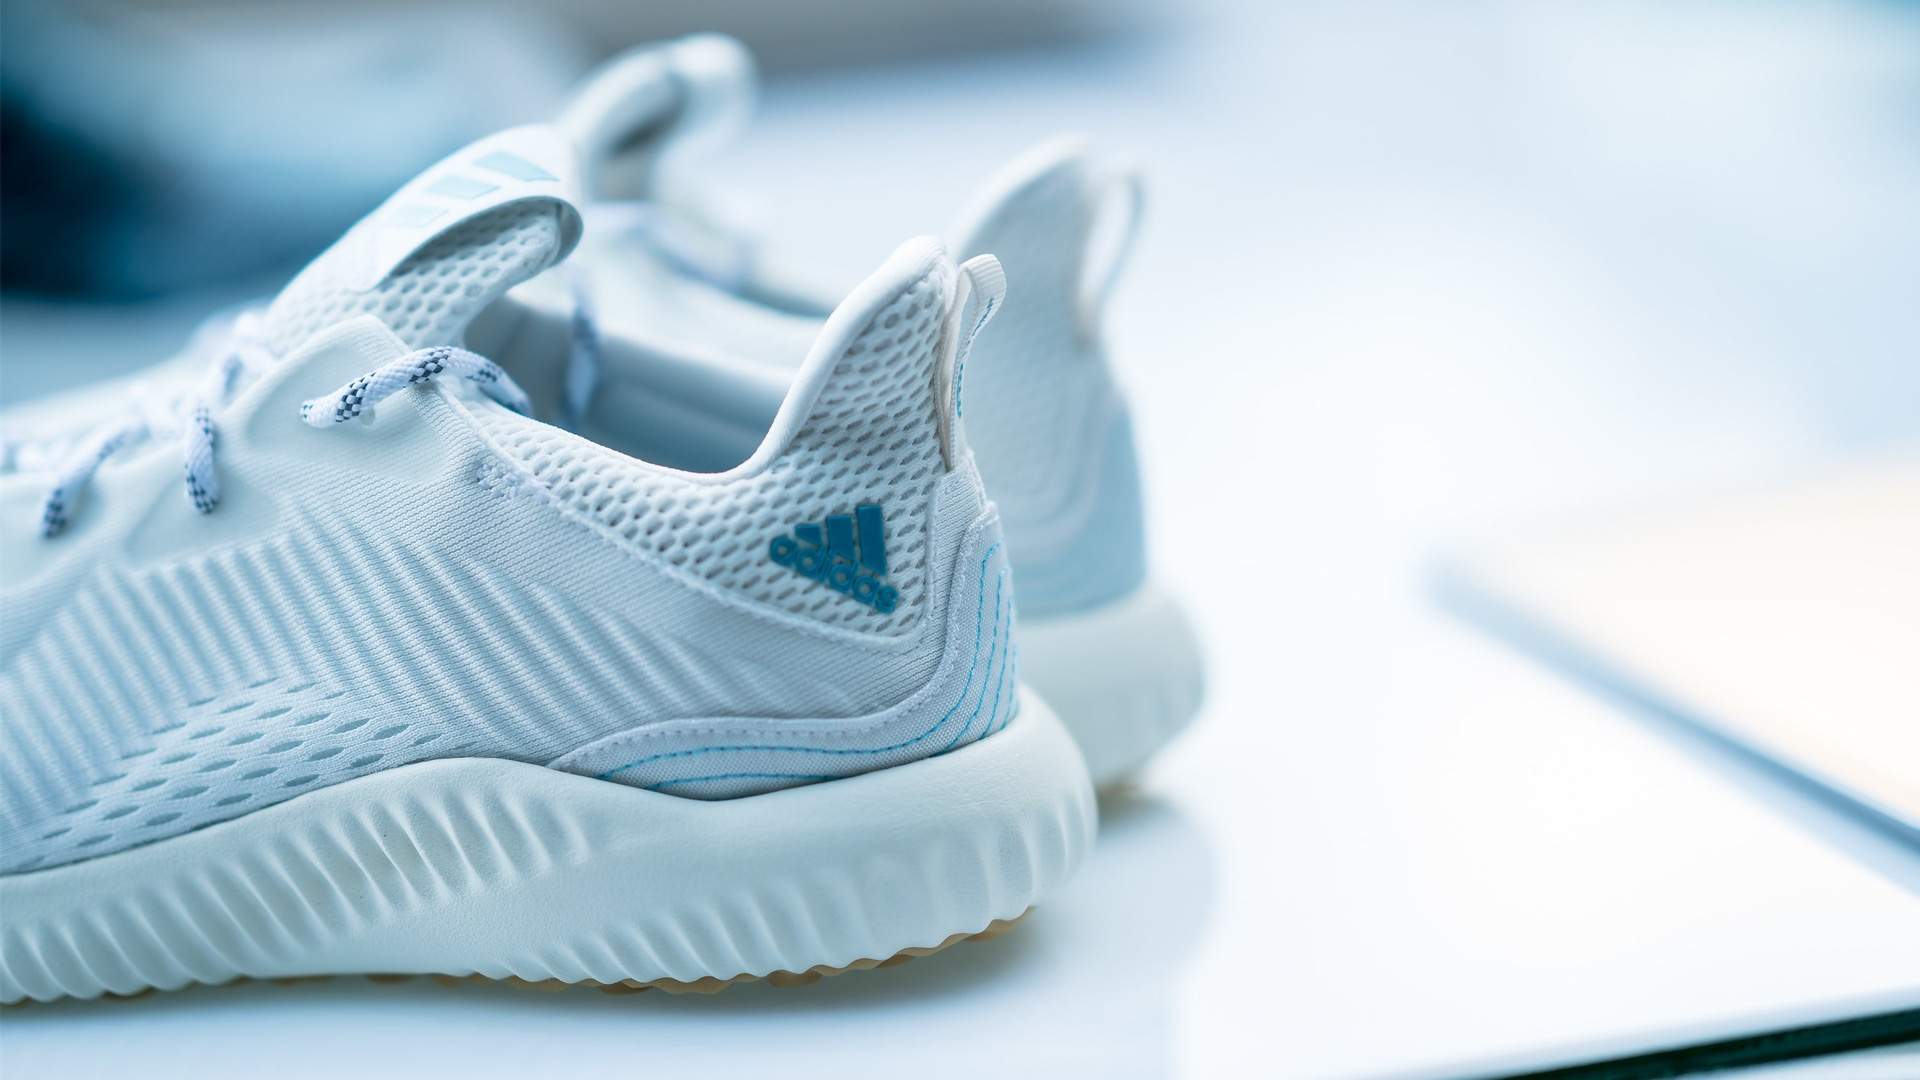 Adidas' New Kicks Are Made From Recycled Ocean Plastic